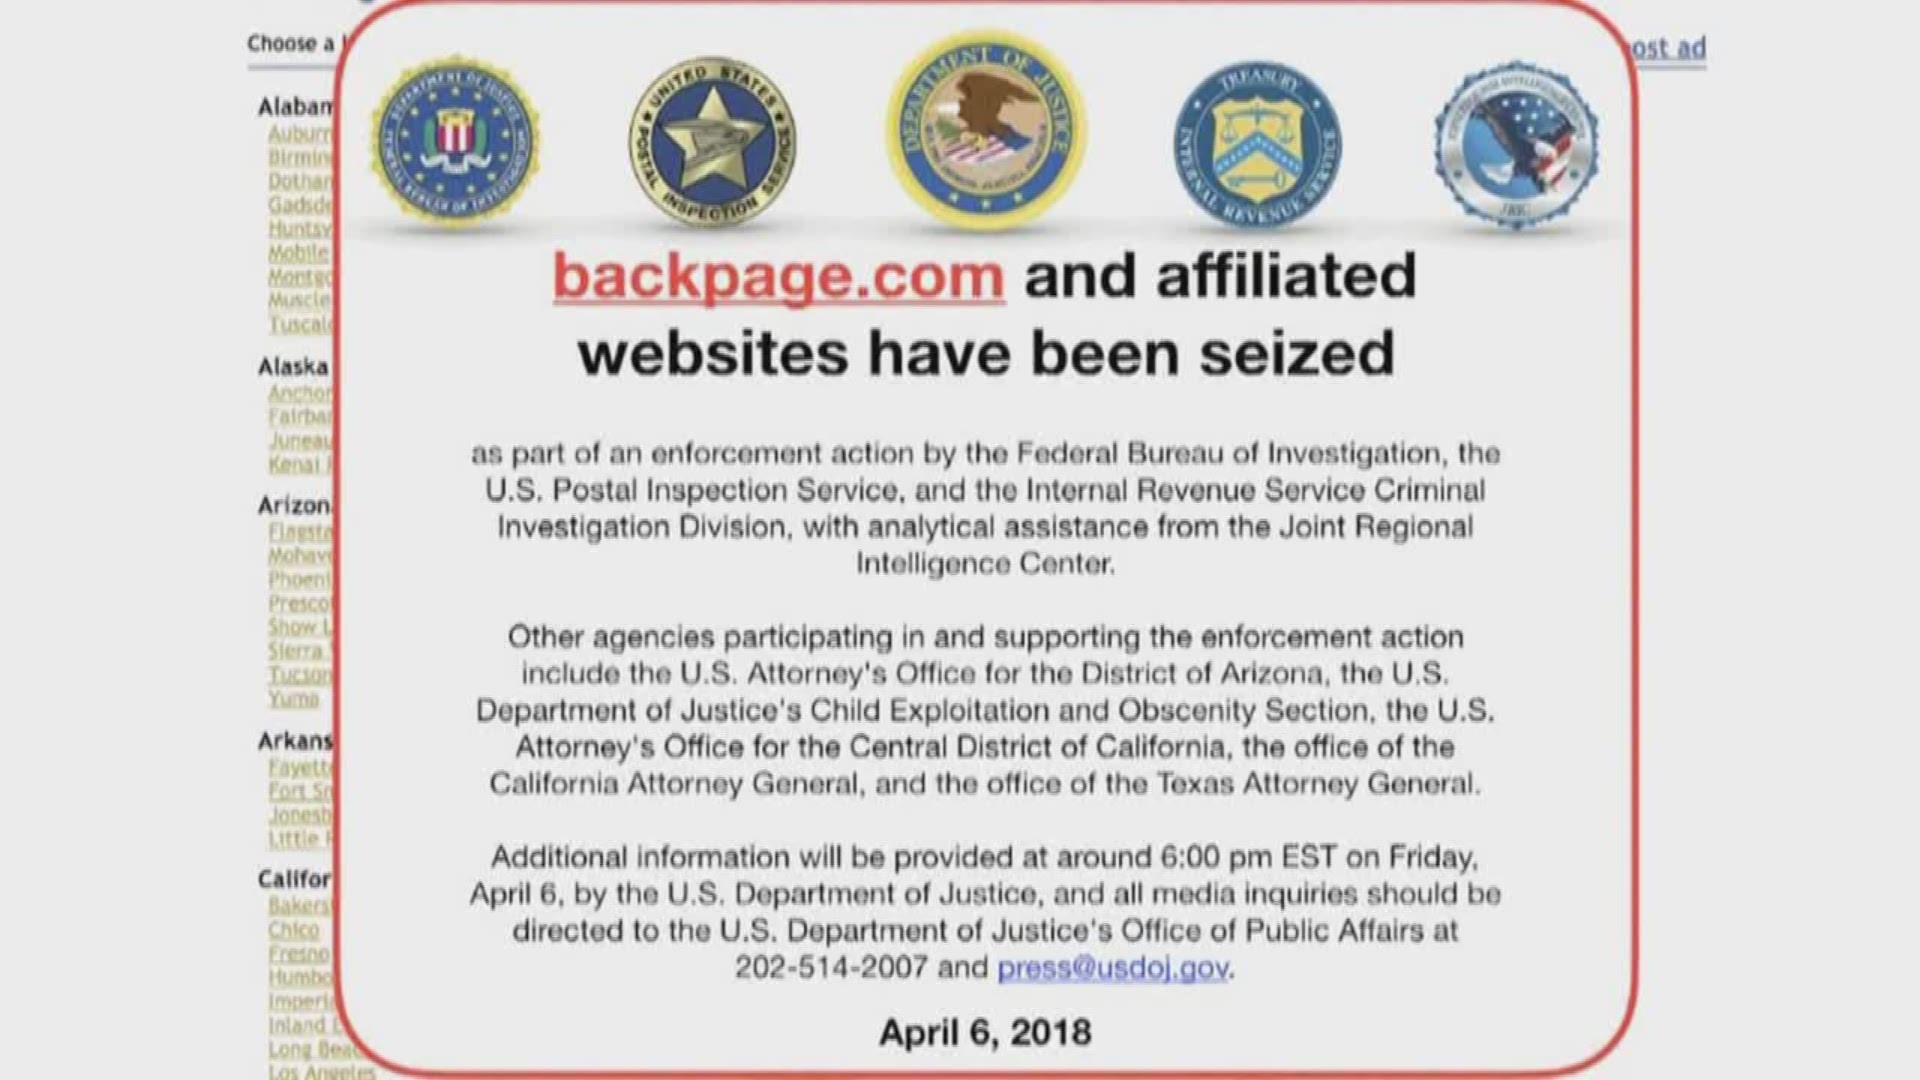 The controversial website backpage has been taken offline &amp; now its owners are facing federal charges for the site's role in promoting prostitution.